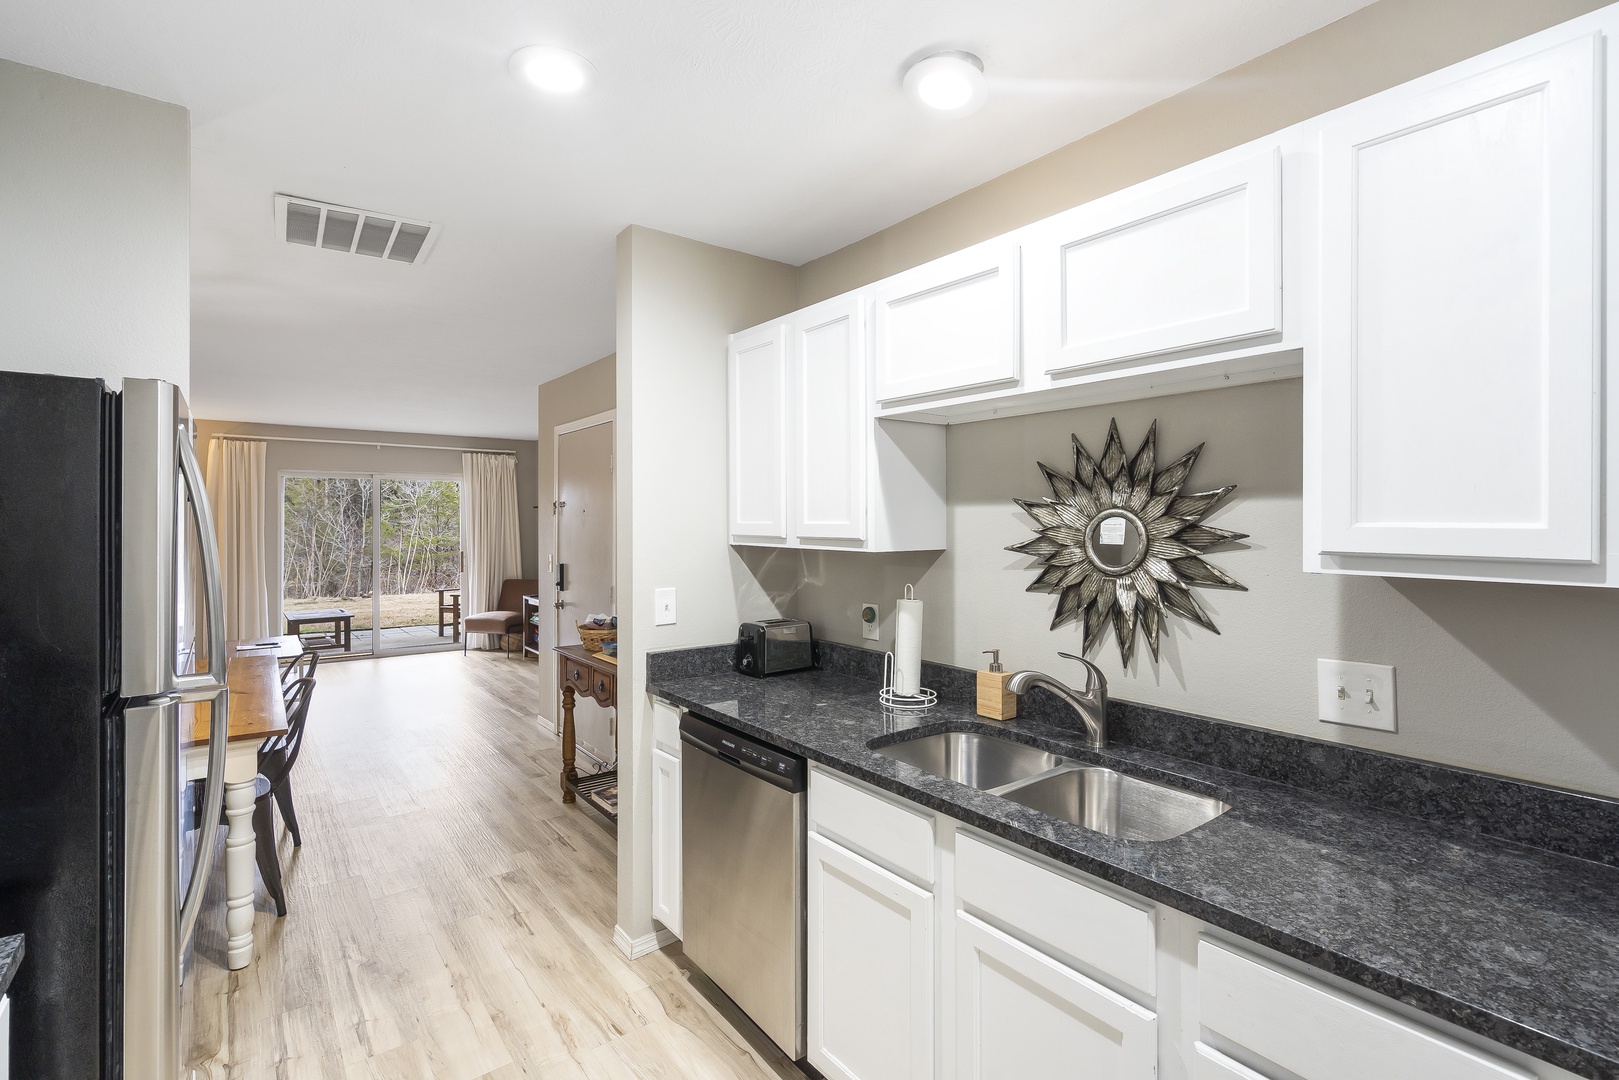 The airy kitchen offers ample space and all the comforts of home